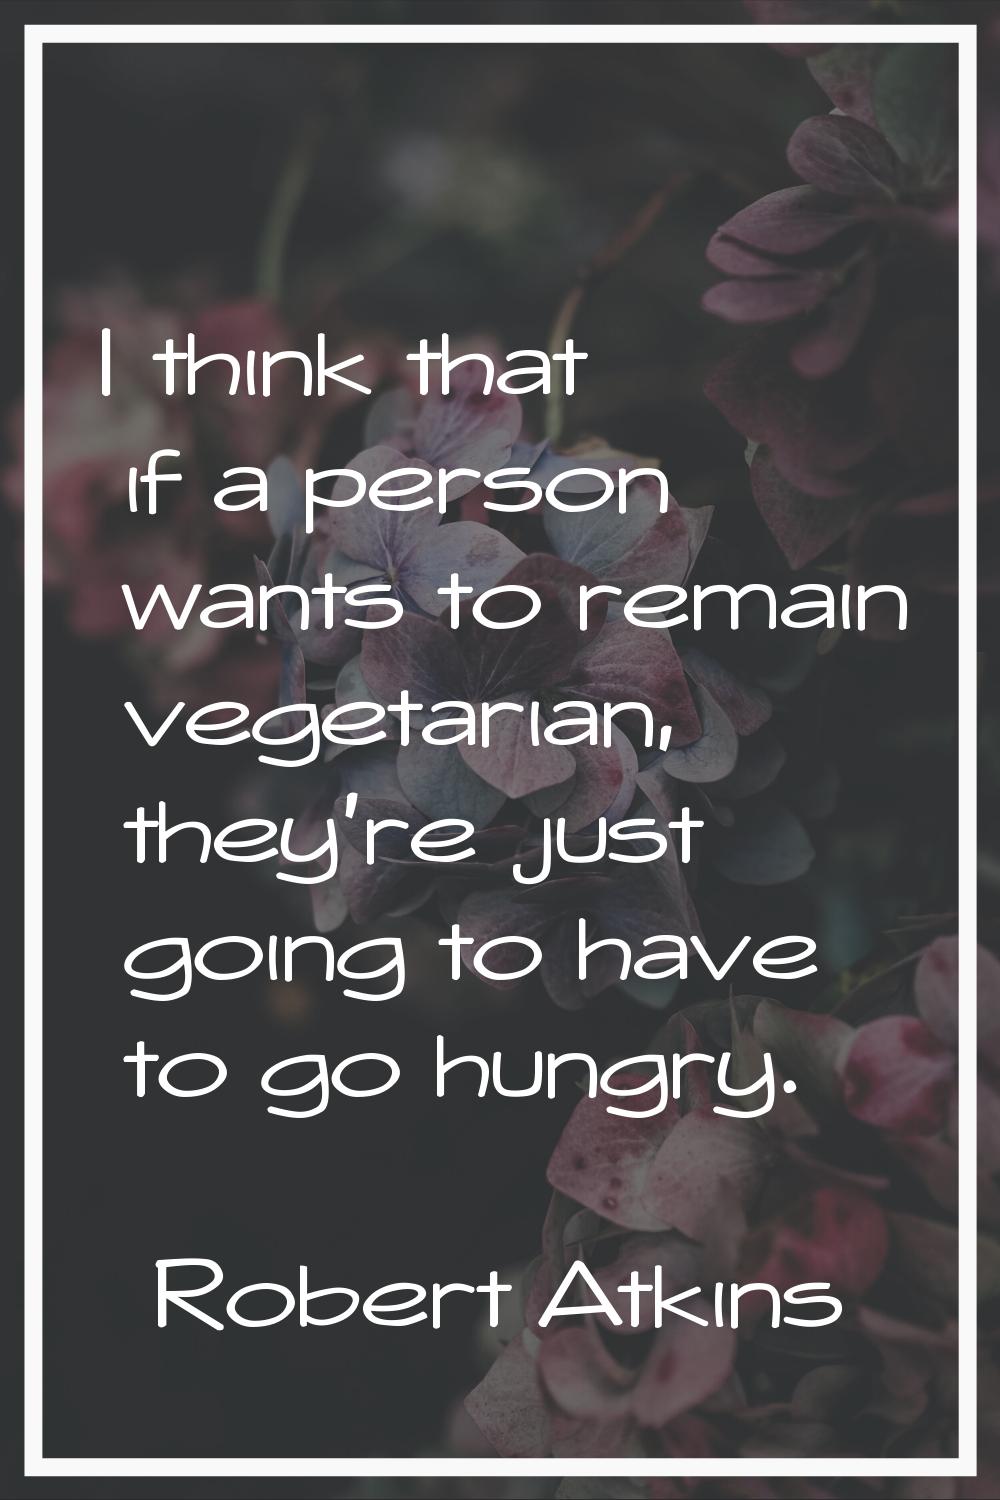 I think that if a person wants to remain vegetarian, they're just going to have to go hungry.